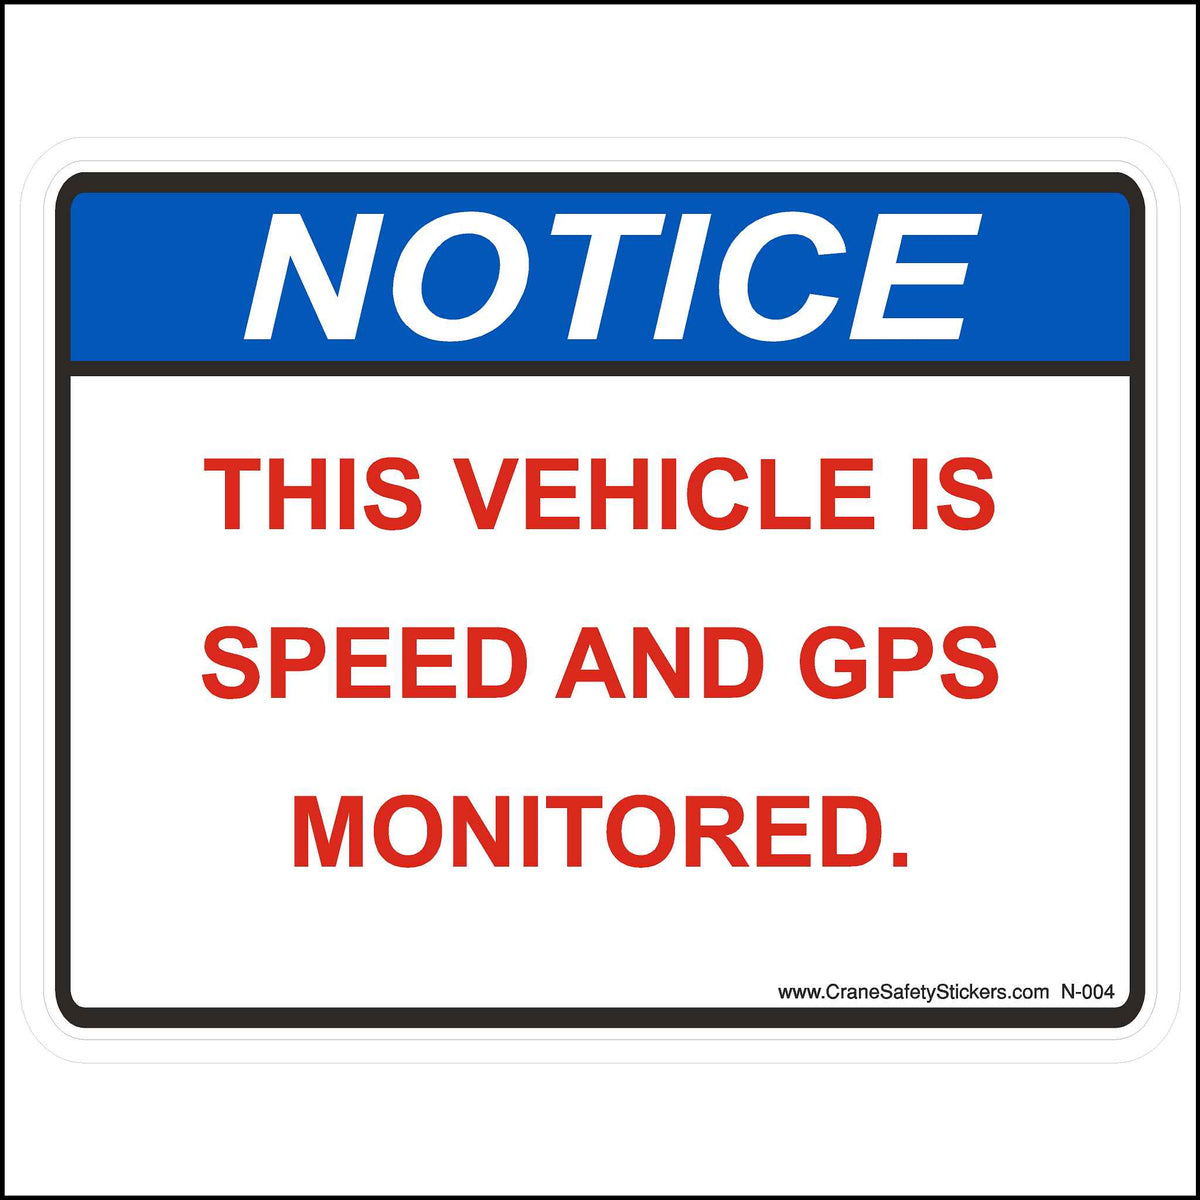 This Vehicle Speed Monitored by GPS Sticker is printed with a blue NOTICE header and red text on a white background.